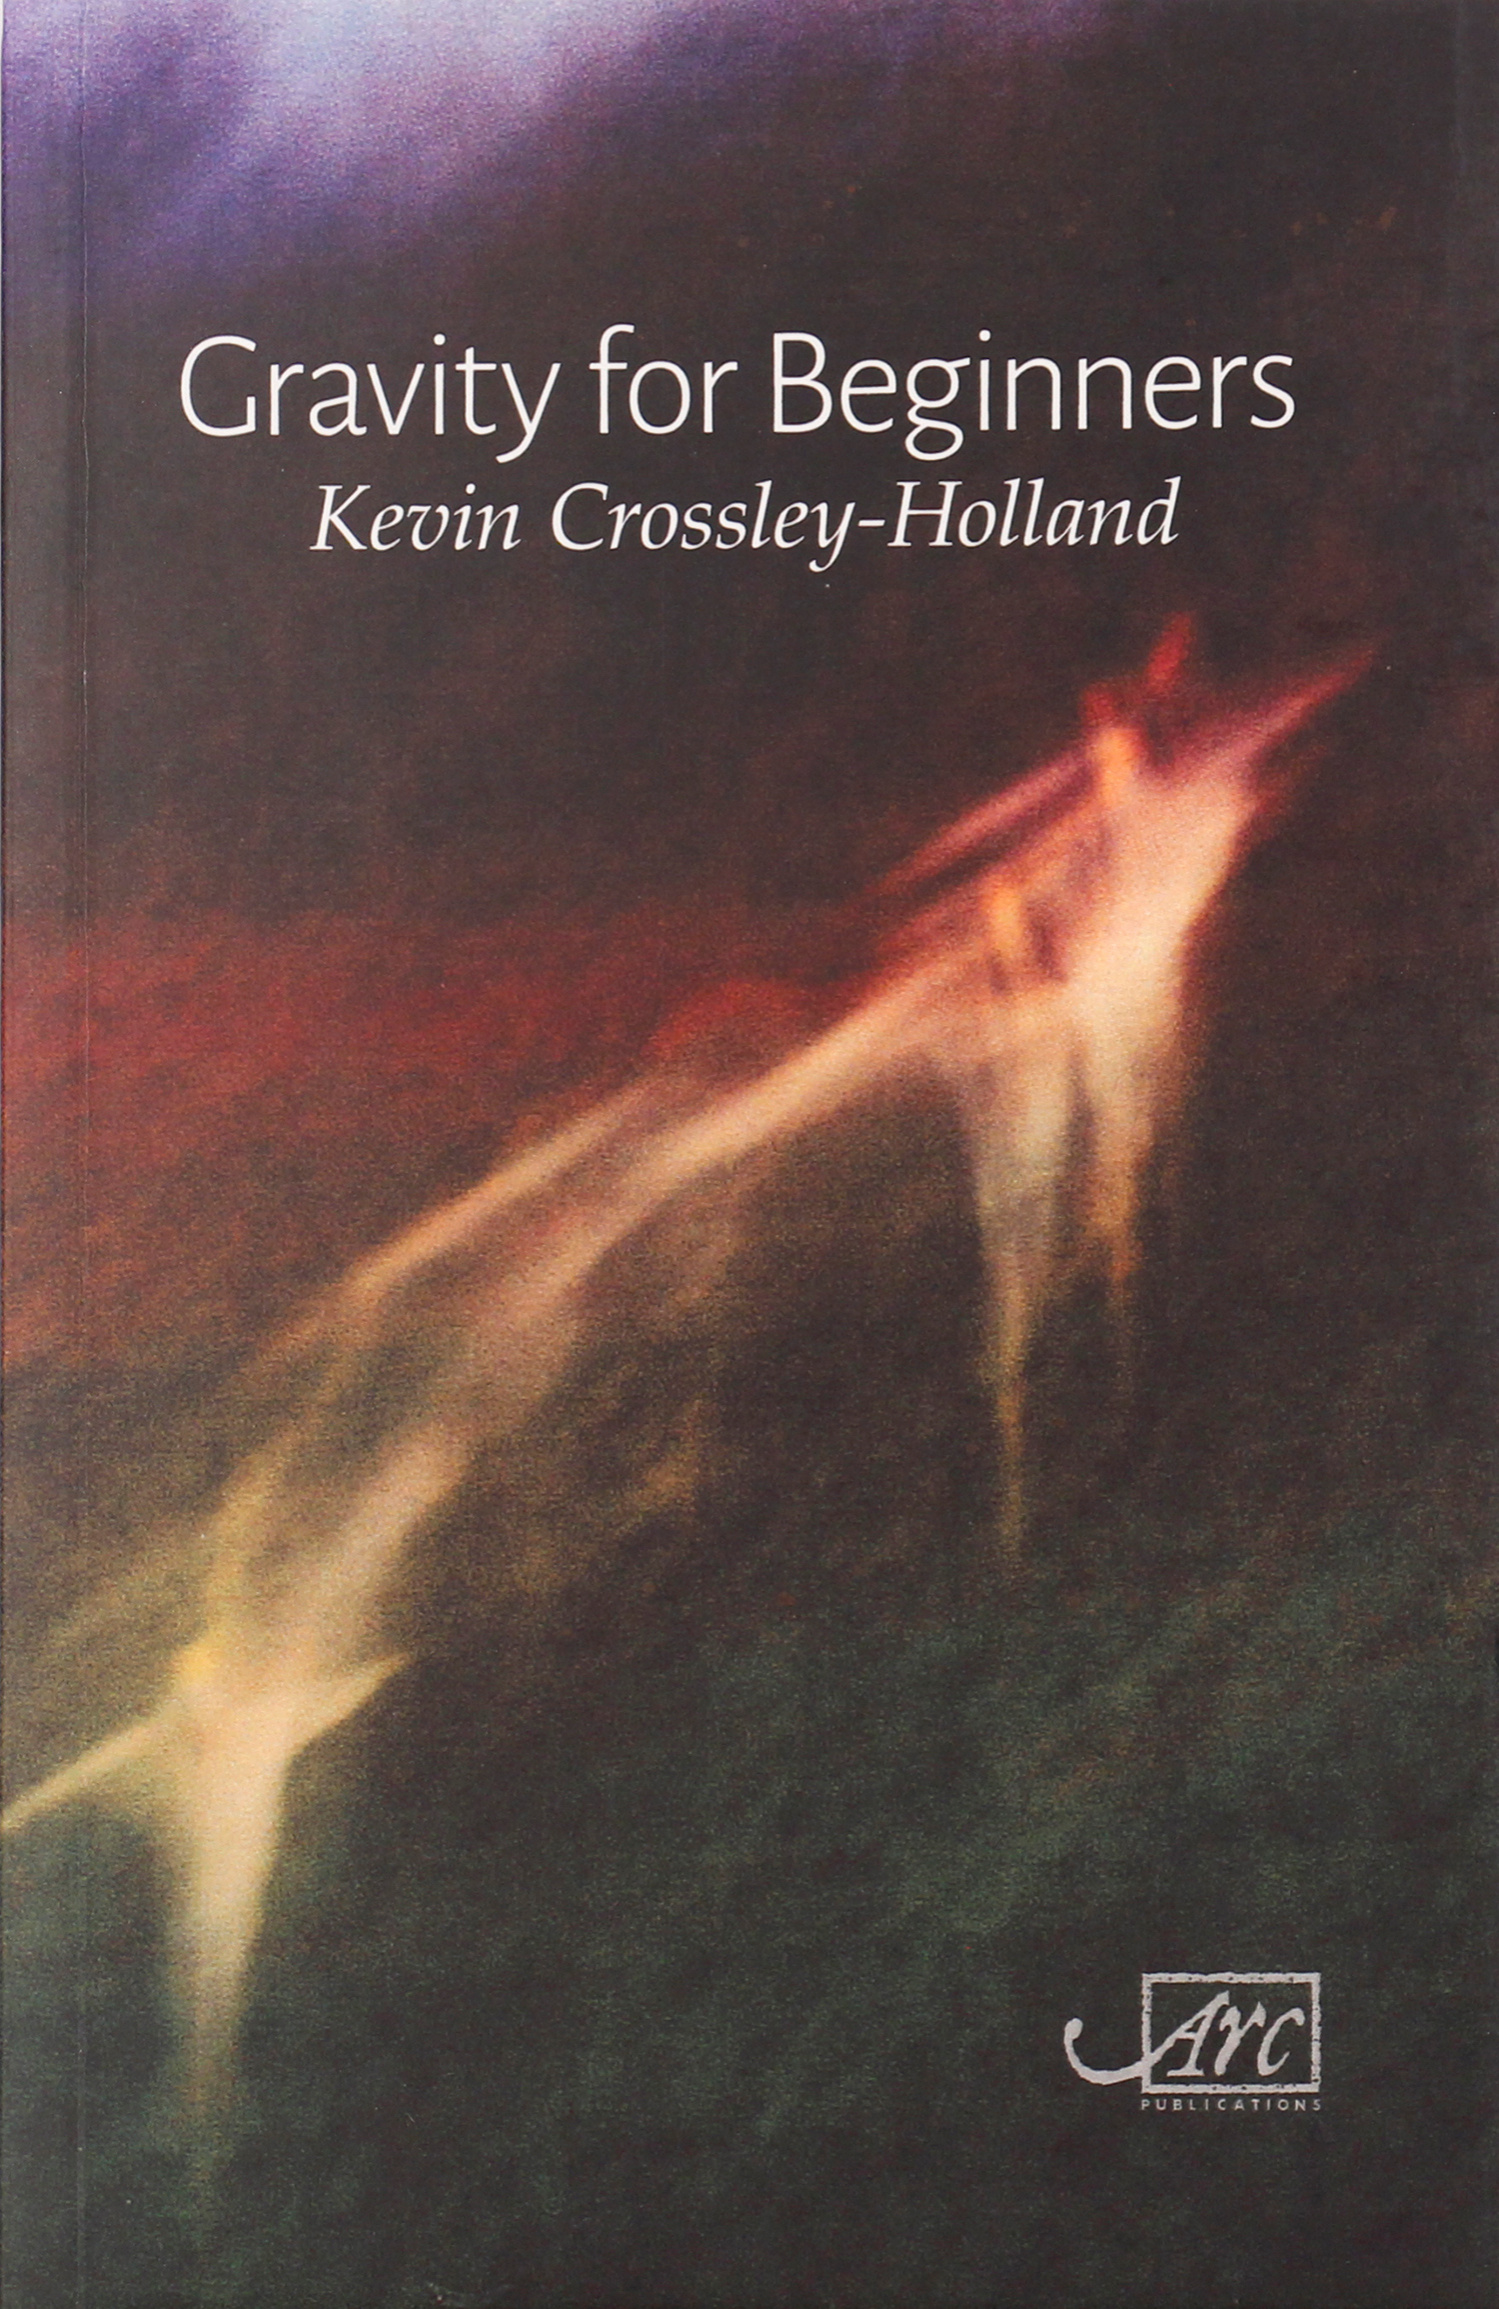 Gravity for Beginners by Kevin Crossley-Holland